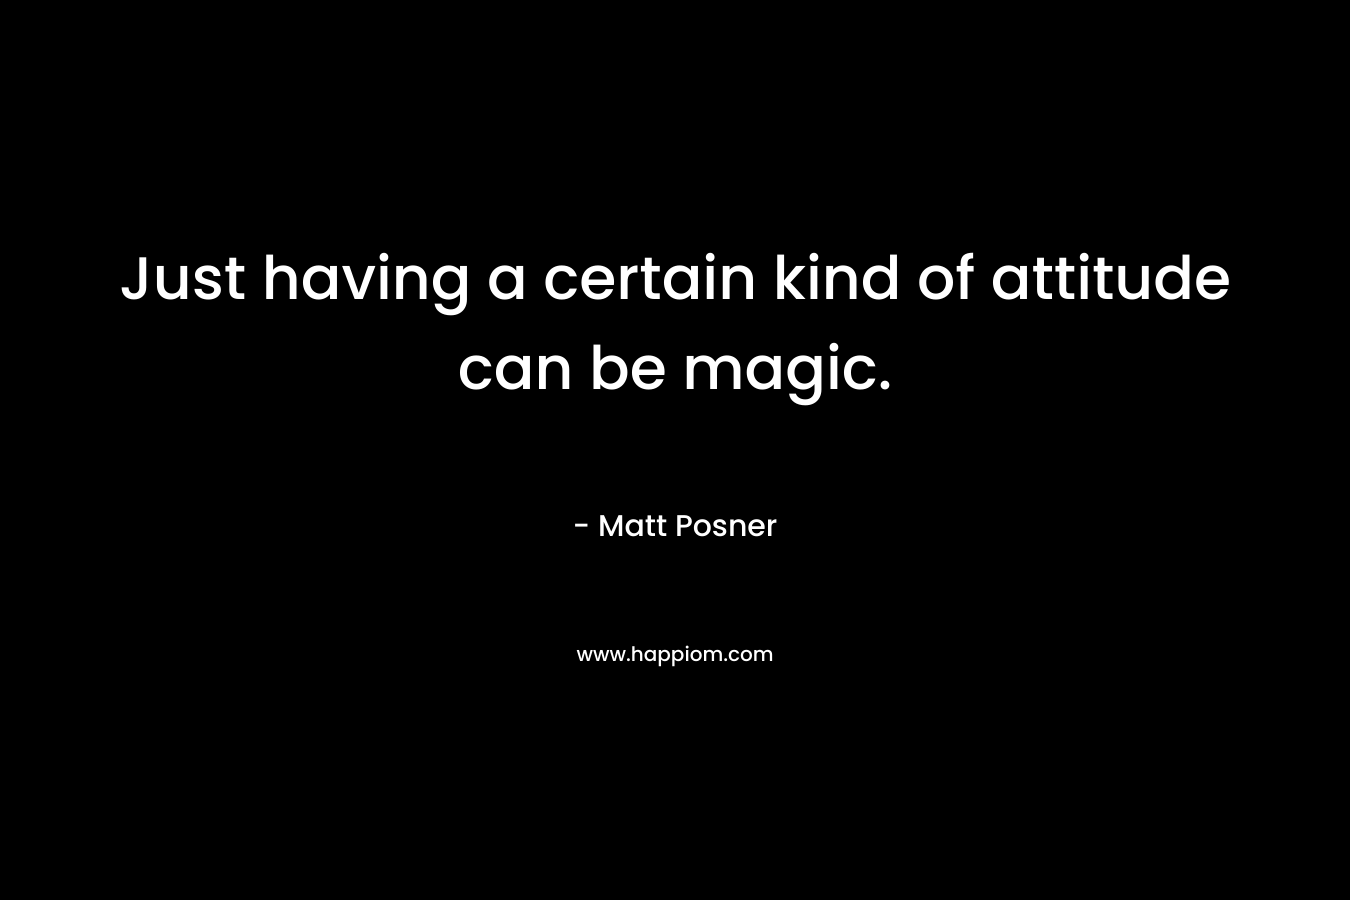 Just having a certain kind of attitude can be magic.